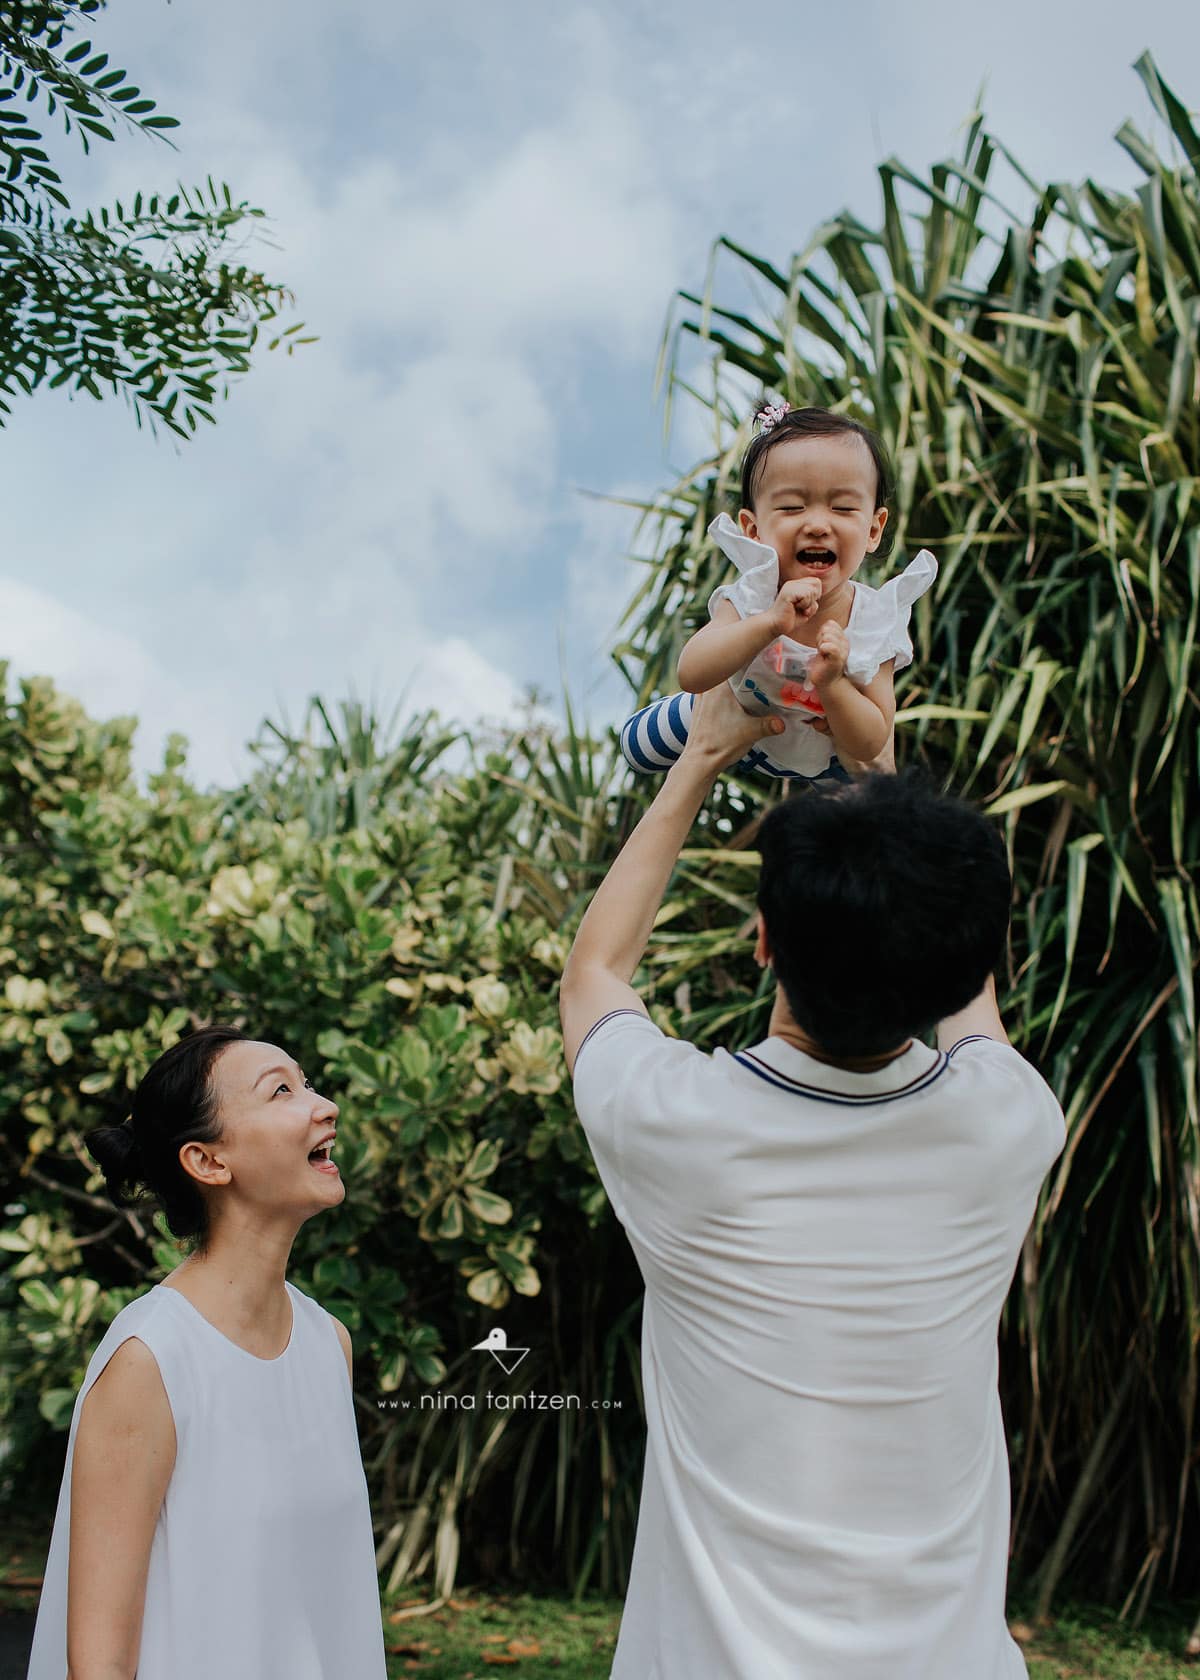 mom looks as dad lifts happy baby up high